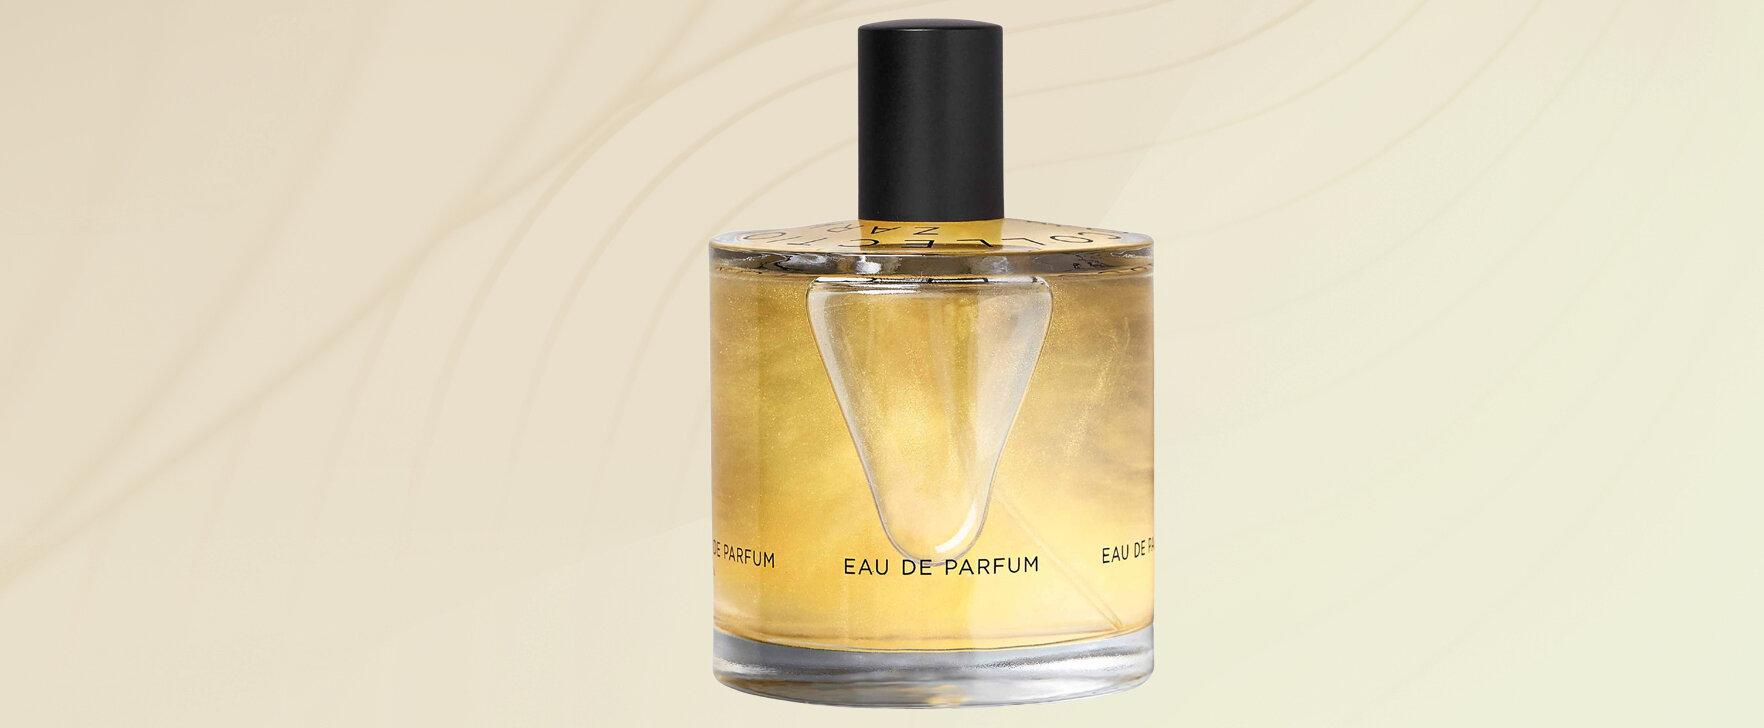 A Tribute to the Treasures of Nature: The New Eau de Parfum "Cloud Collection (No.4)" by Zarkoperfume